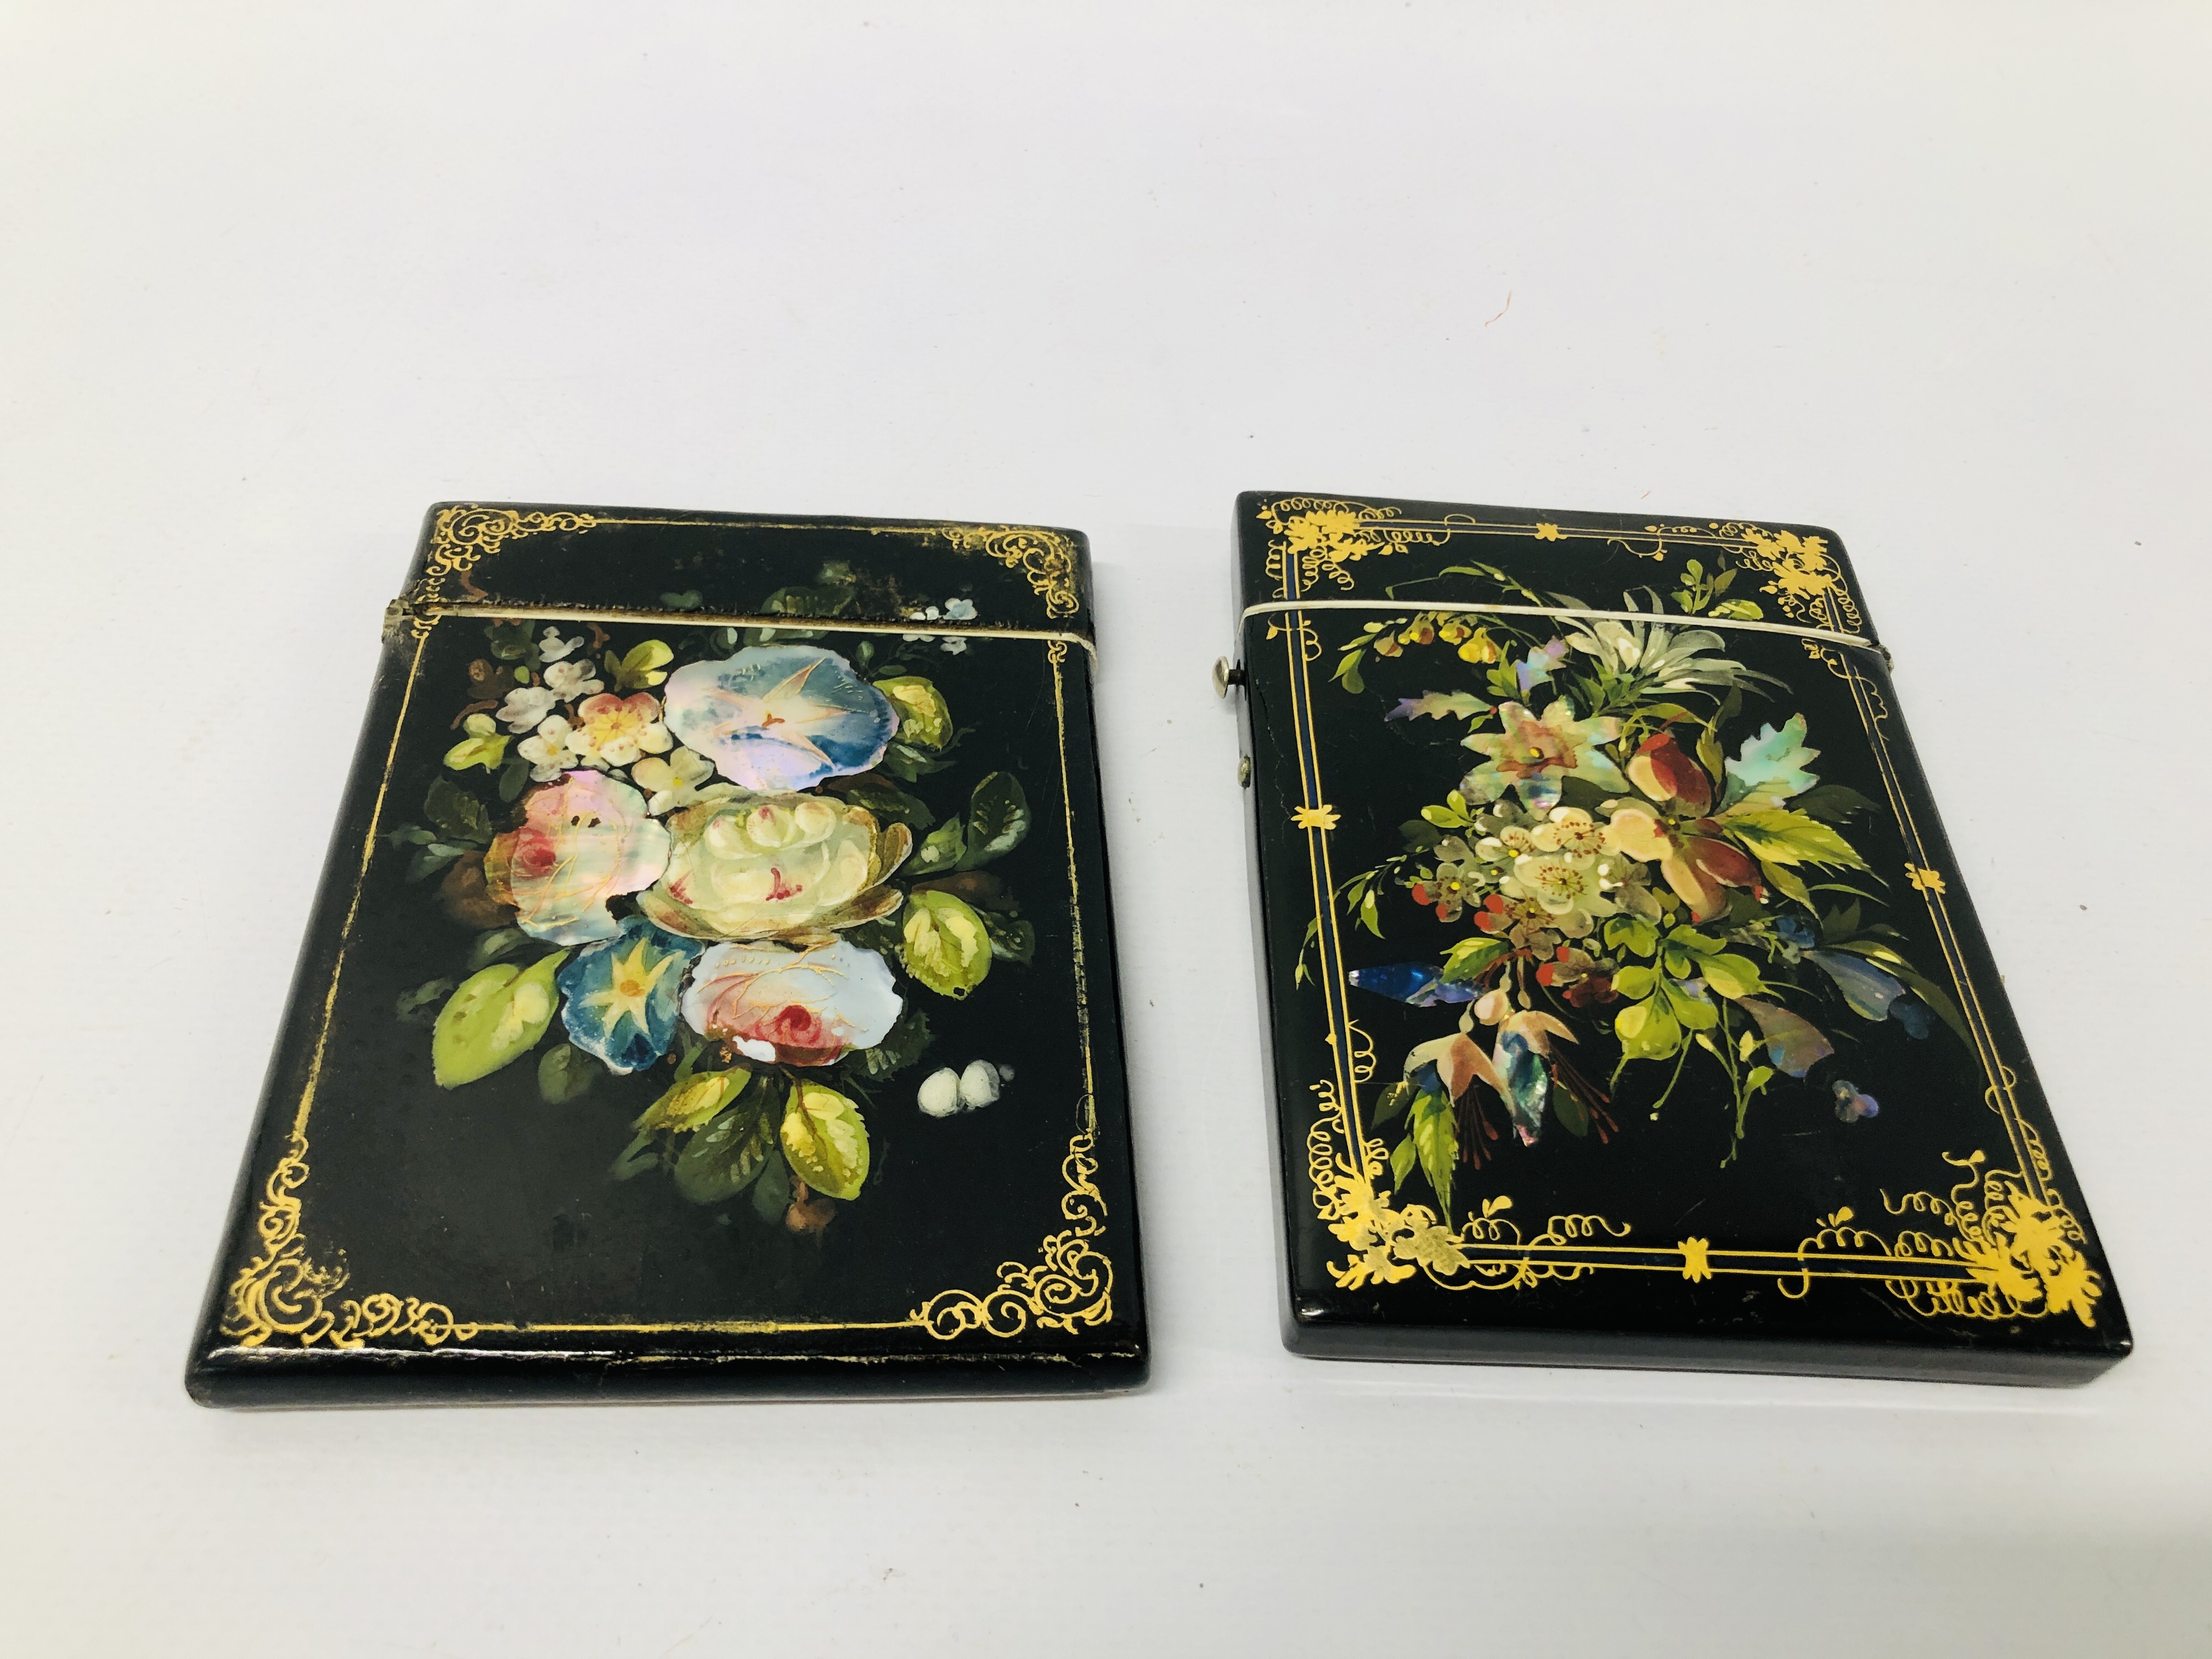 2 X VICTORIAN PAPIER MACHE CARD CASES BEAUTIFULLY DECORATED WITH HAND PAINTING MOTHER OF PEARL